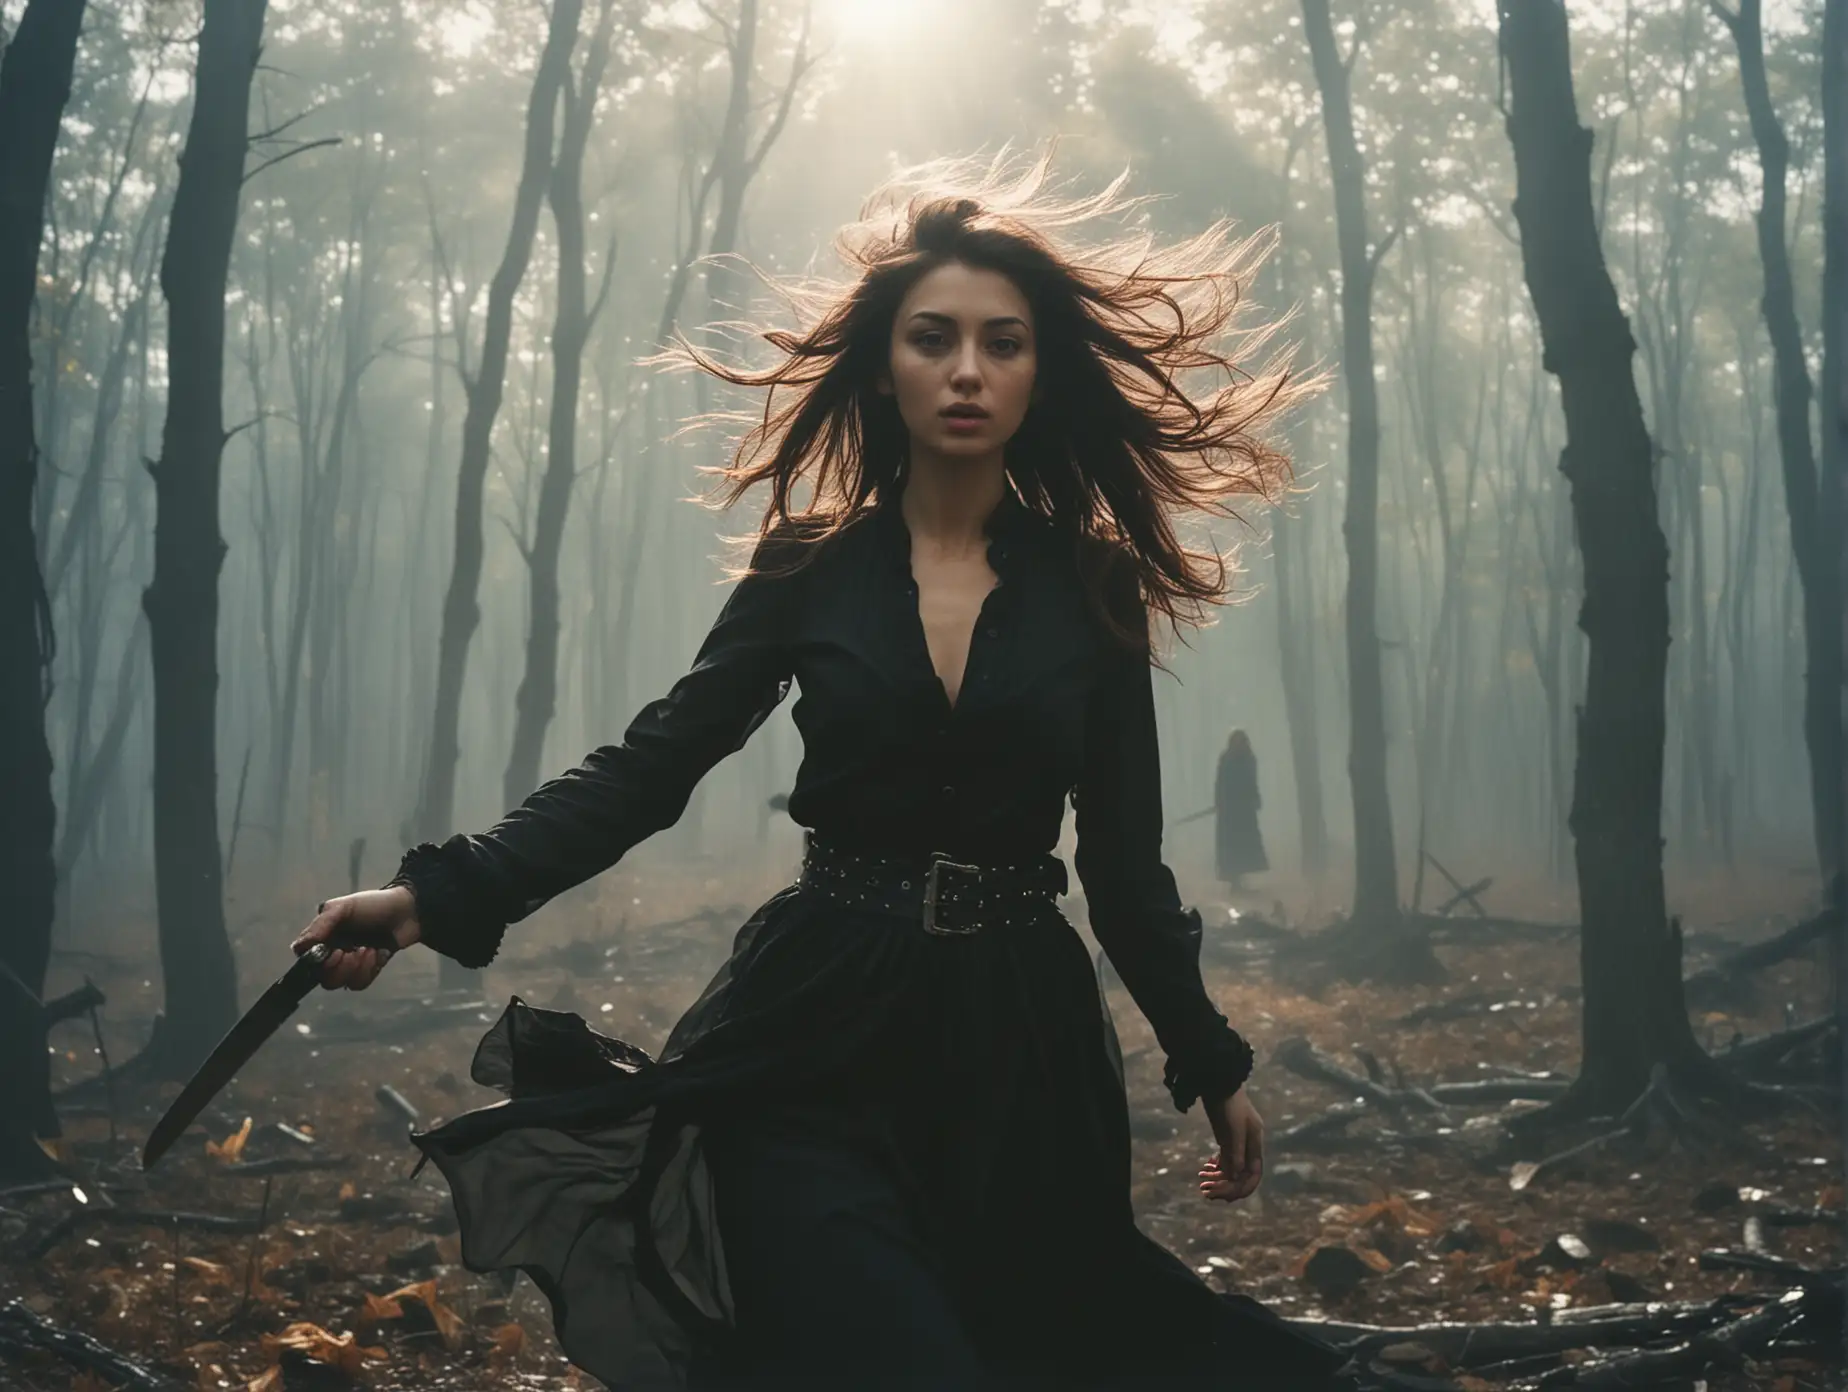 Stunning-Tatar-Woman-in-Forest-Confrontation-Vogue-Style-Encounter-with-Zombies